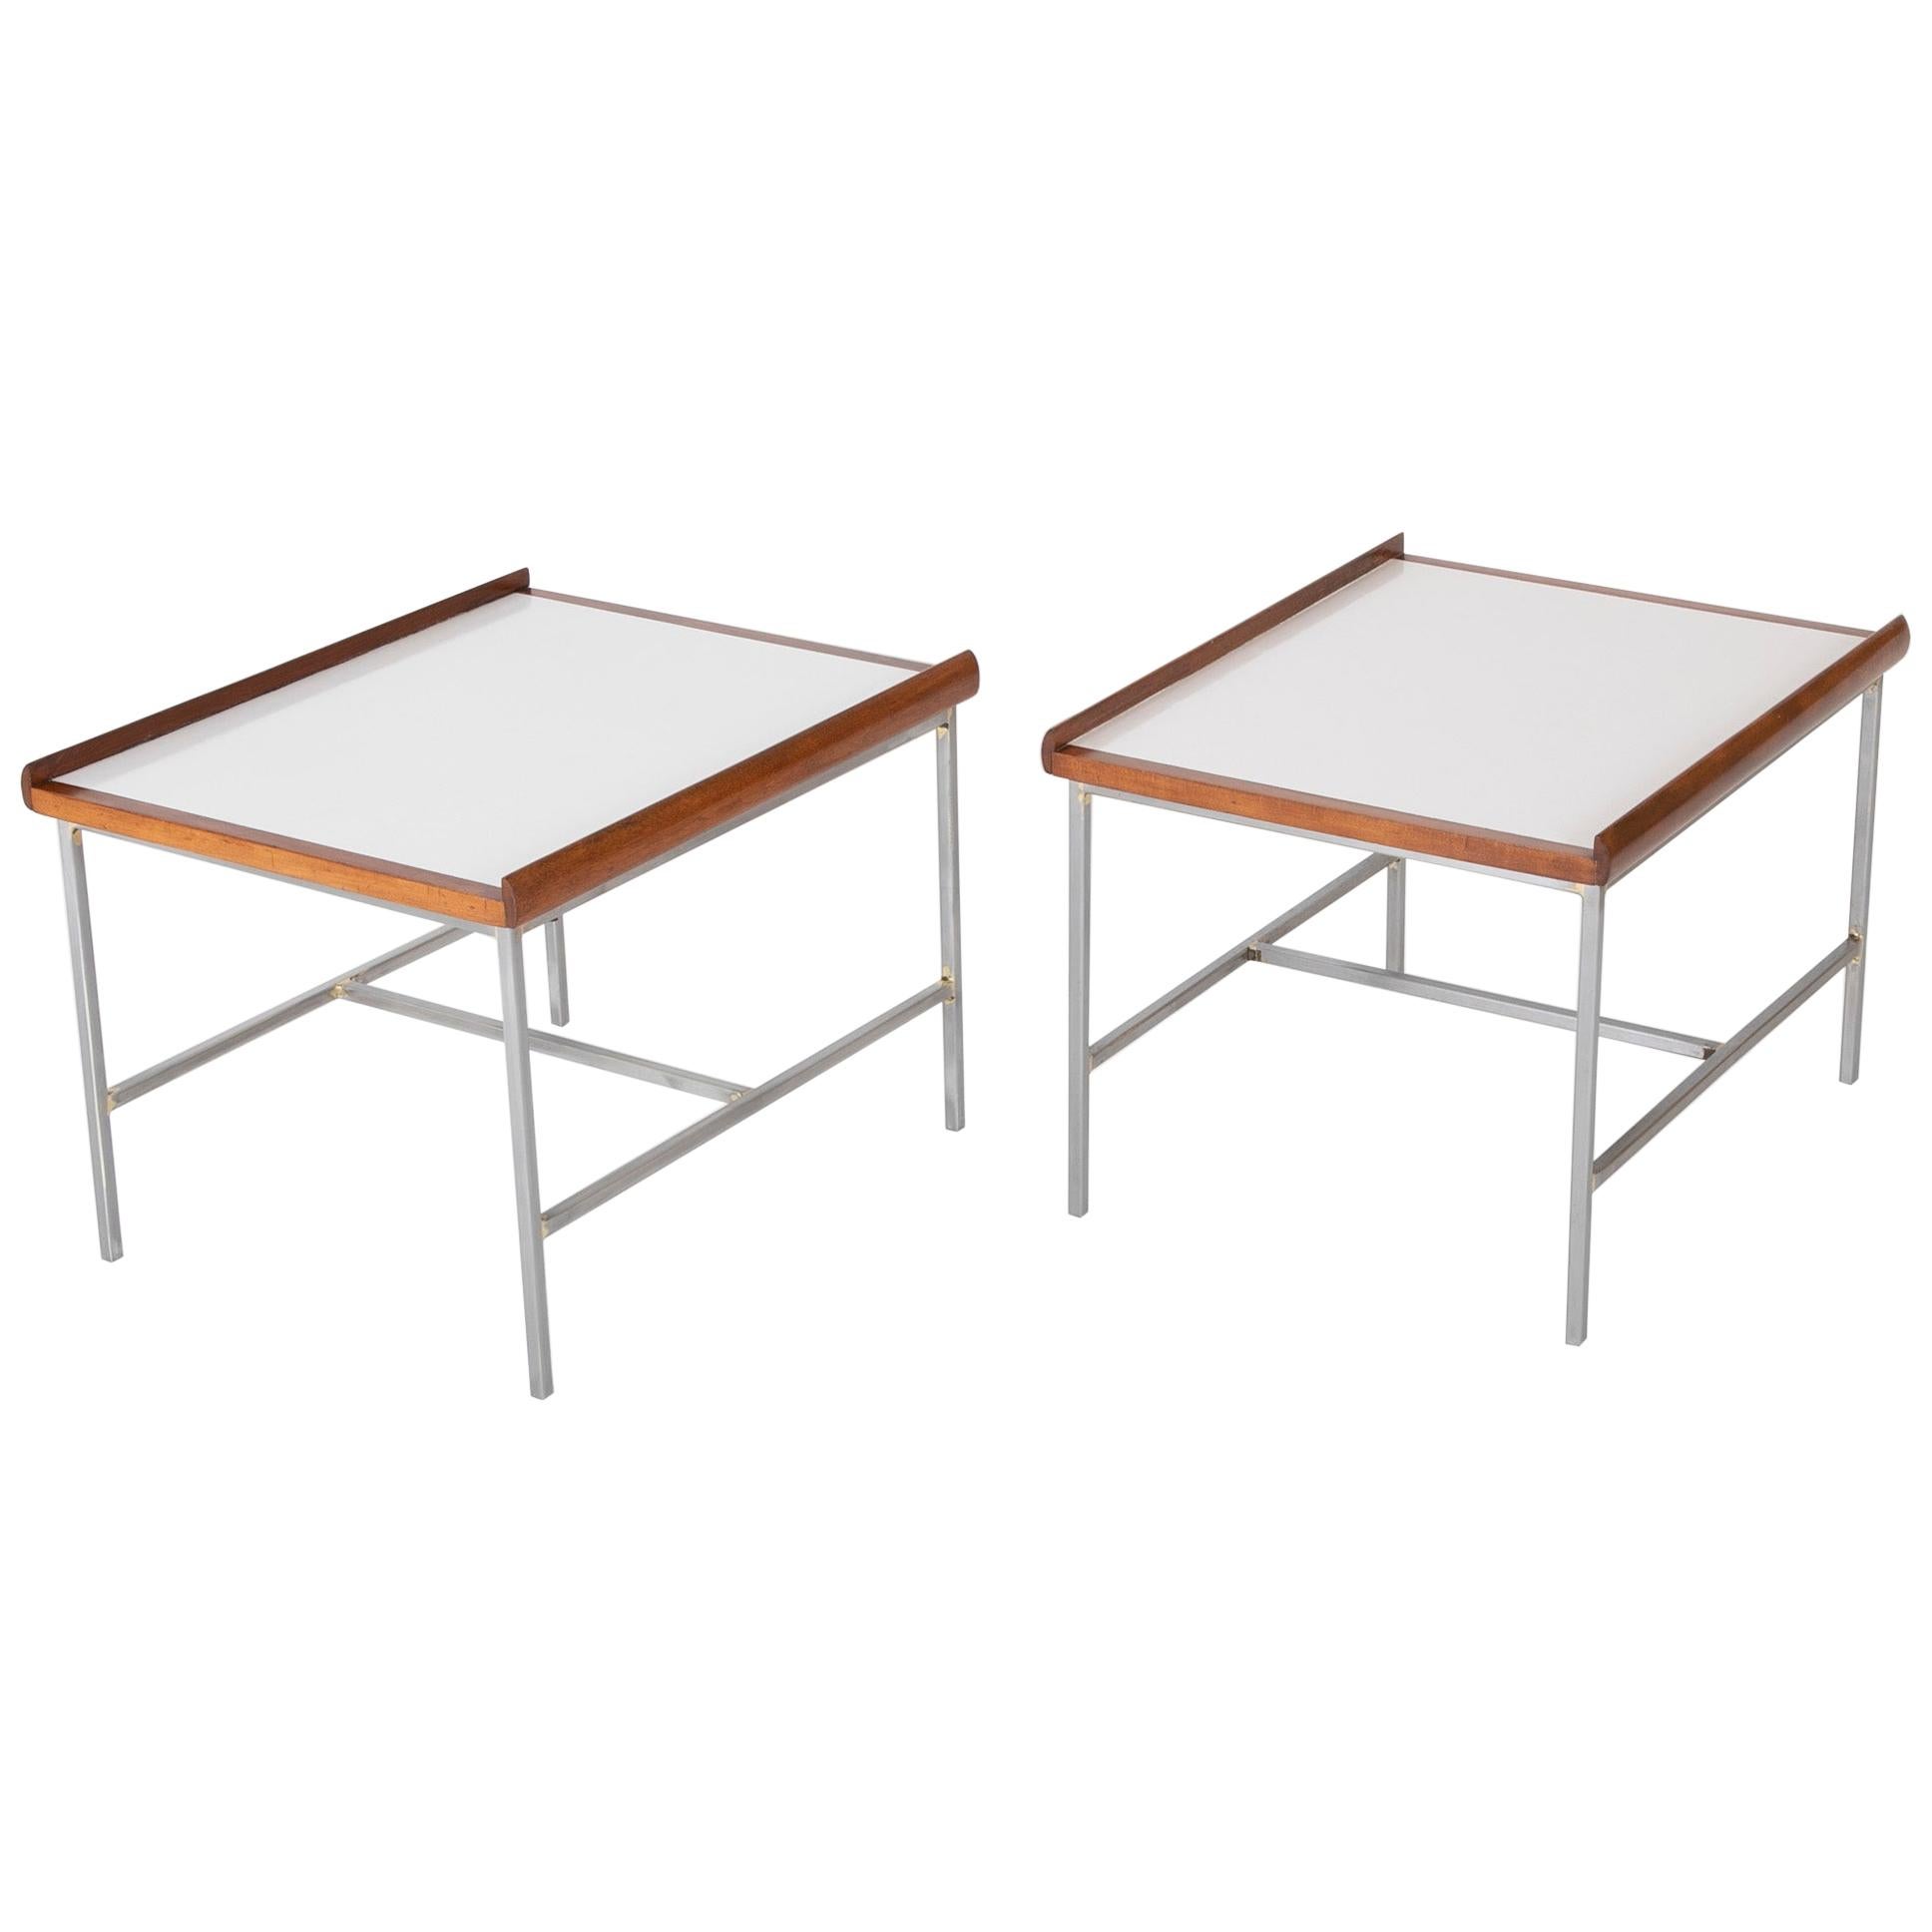 Pair of Walnut and Steel Side Tables in the Manner of Paul McCobb